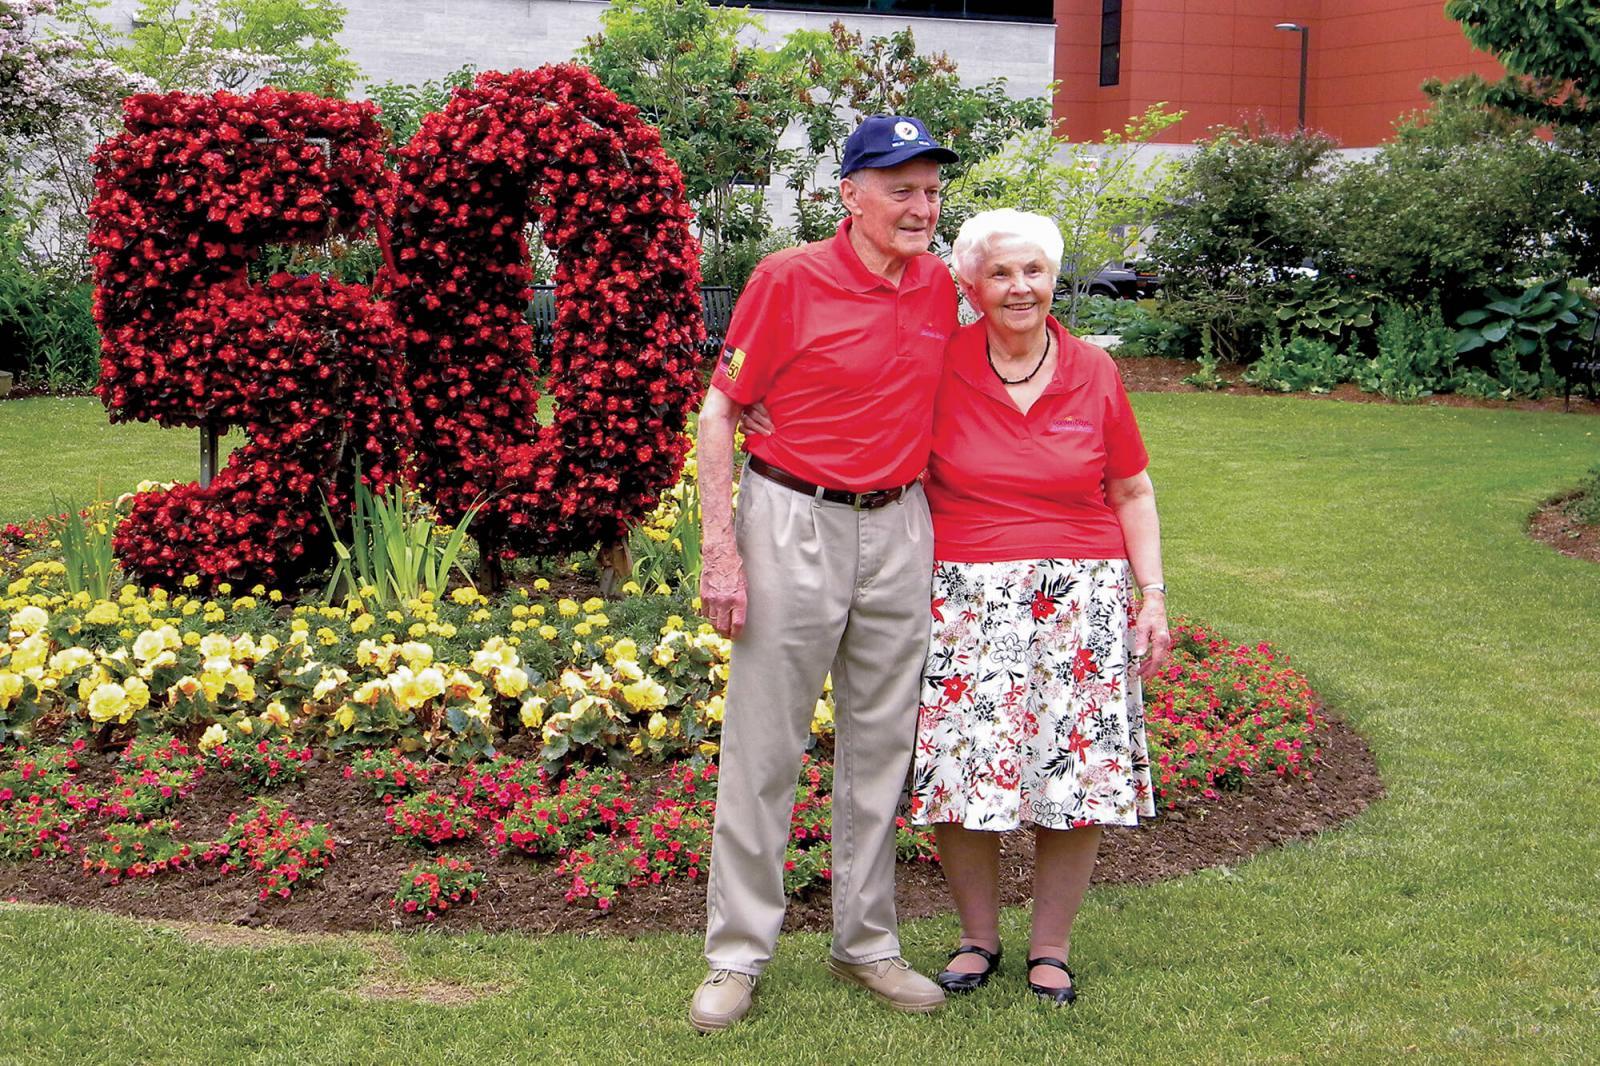 Margaret and Ivan Stinson are an inspiring couple, who organized the Garden Day event that celebrated the University of Guelph’s 50th anniversary.